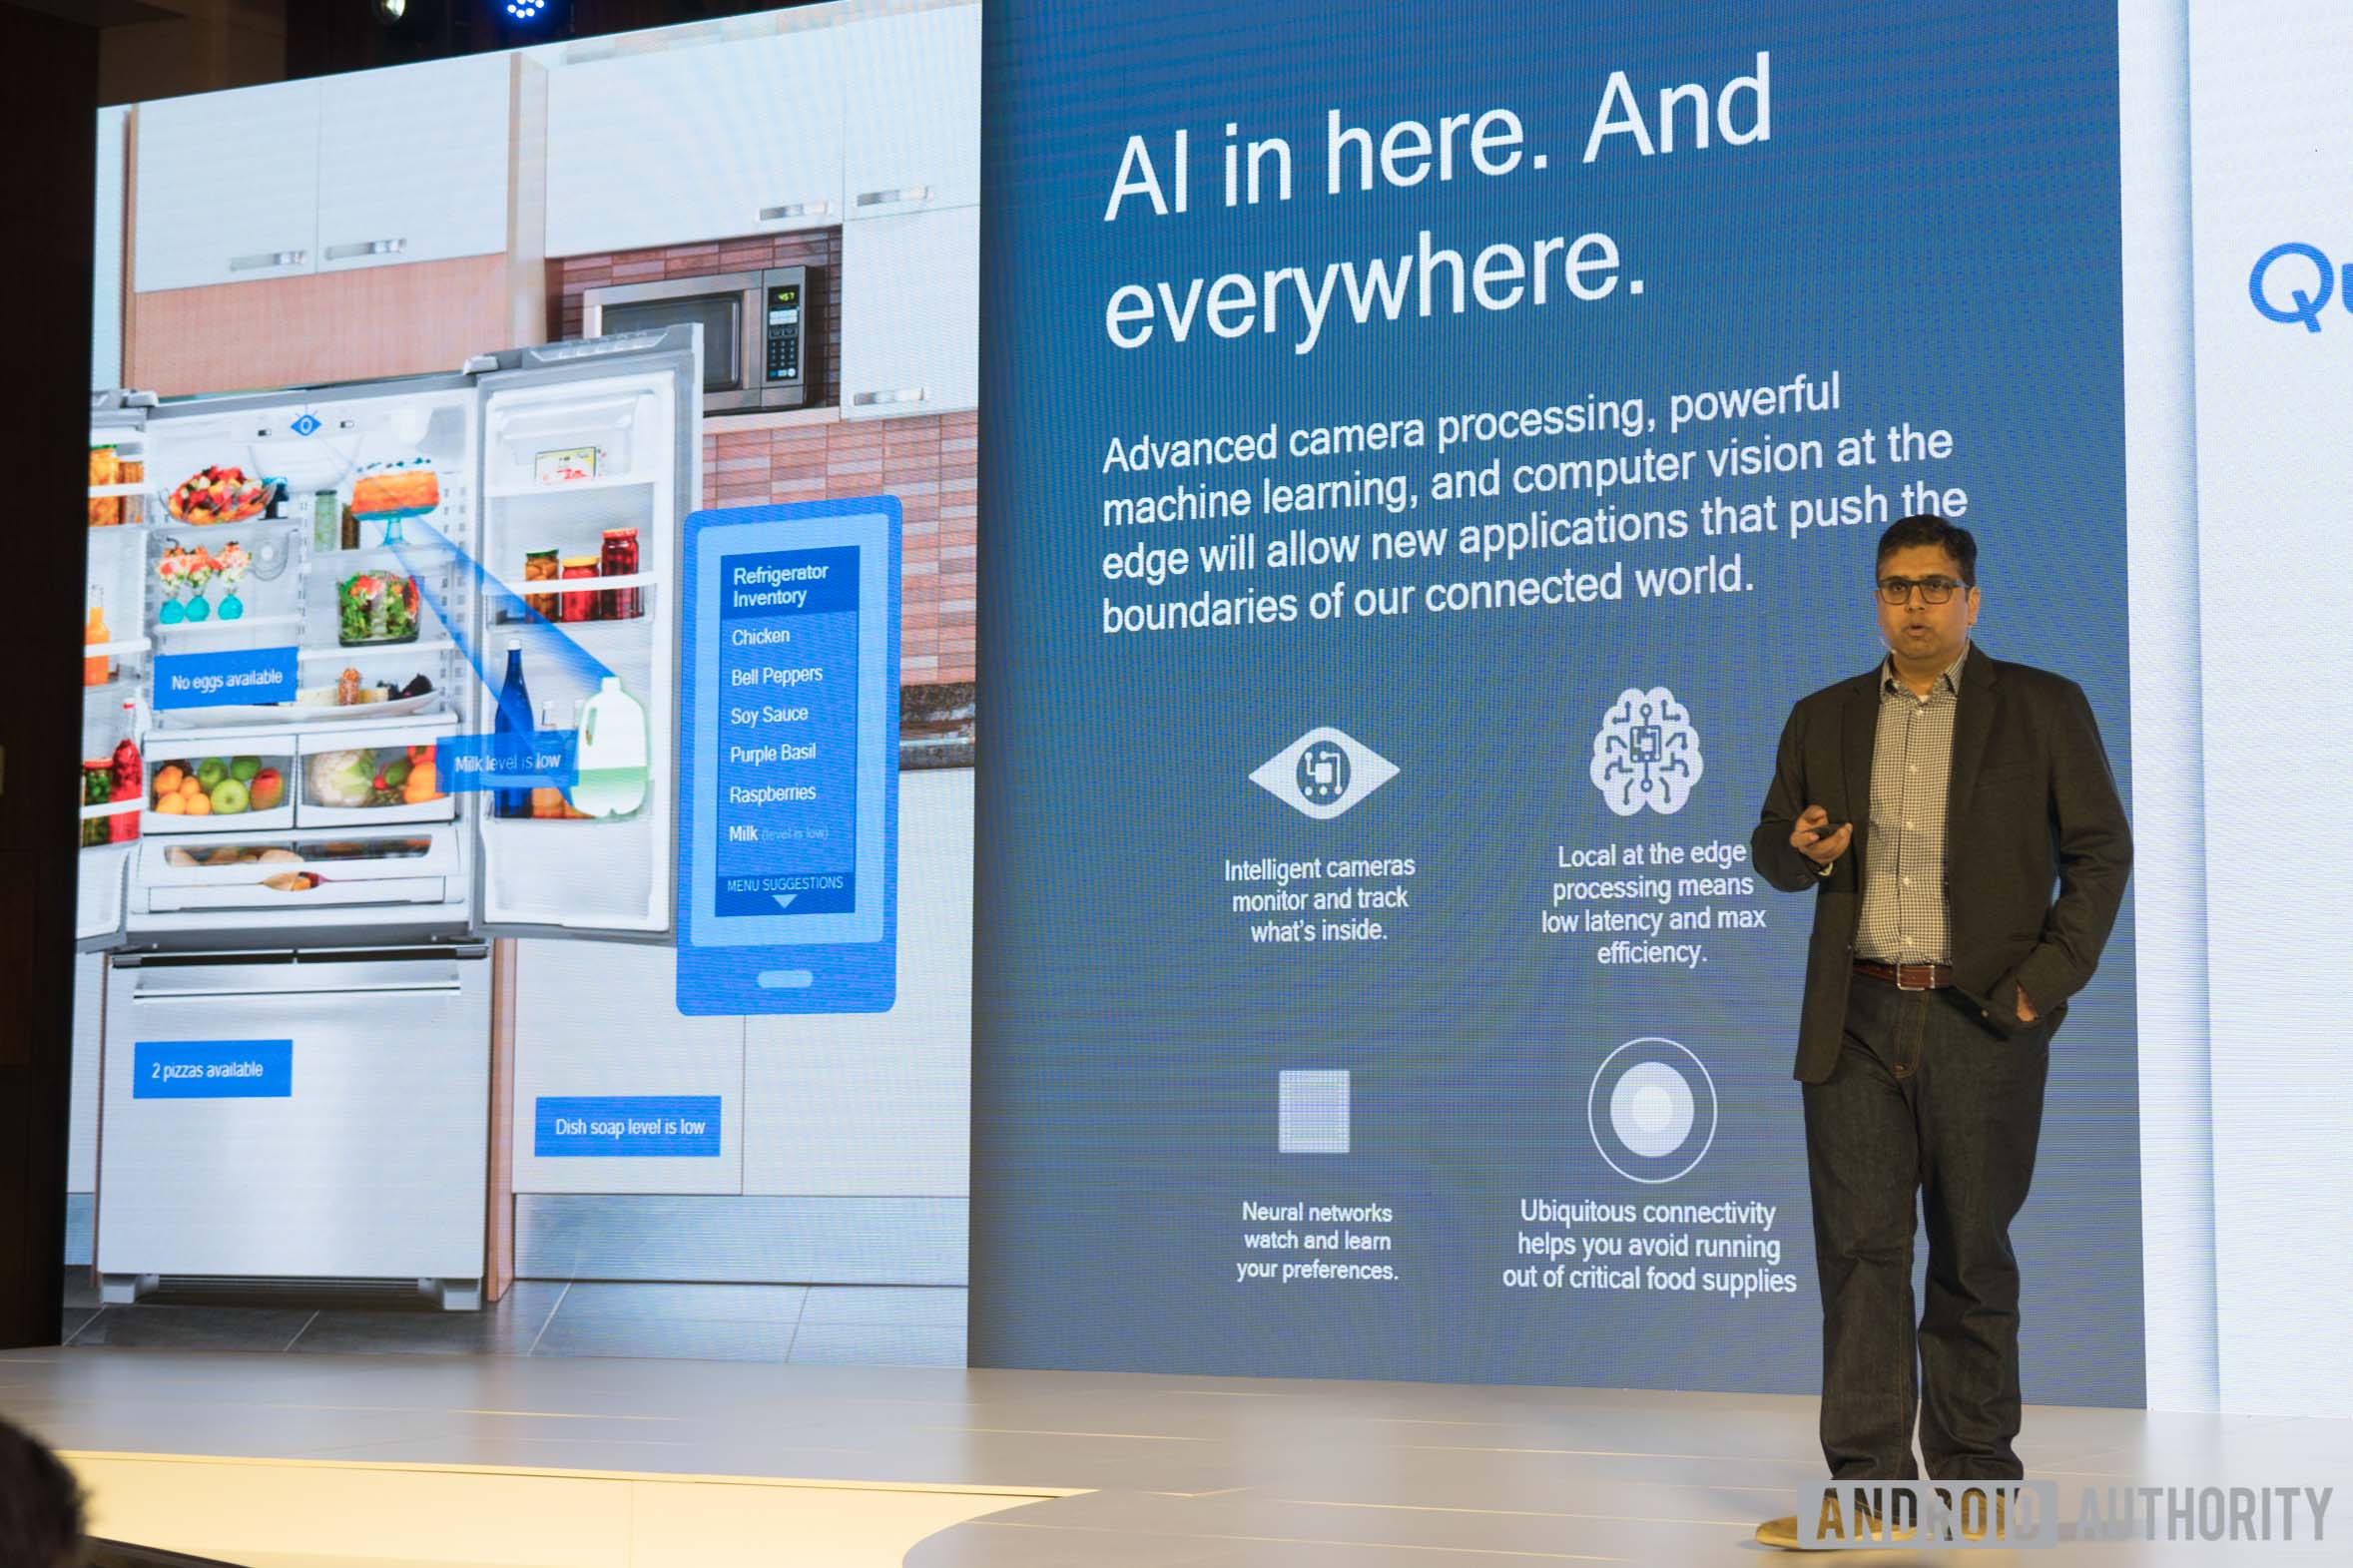 Qualcomm Product Manager Shardul Brahmbhatt gives an example of the IOT using on-device AI in a refrigerator